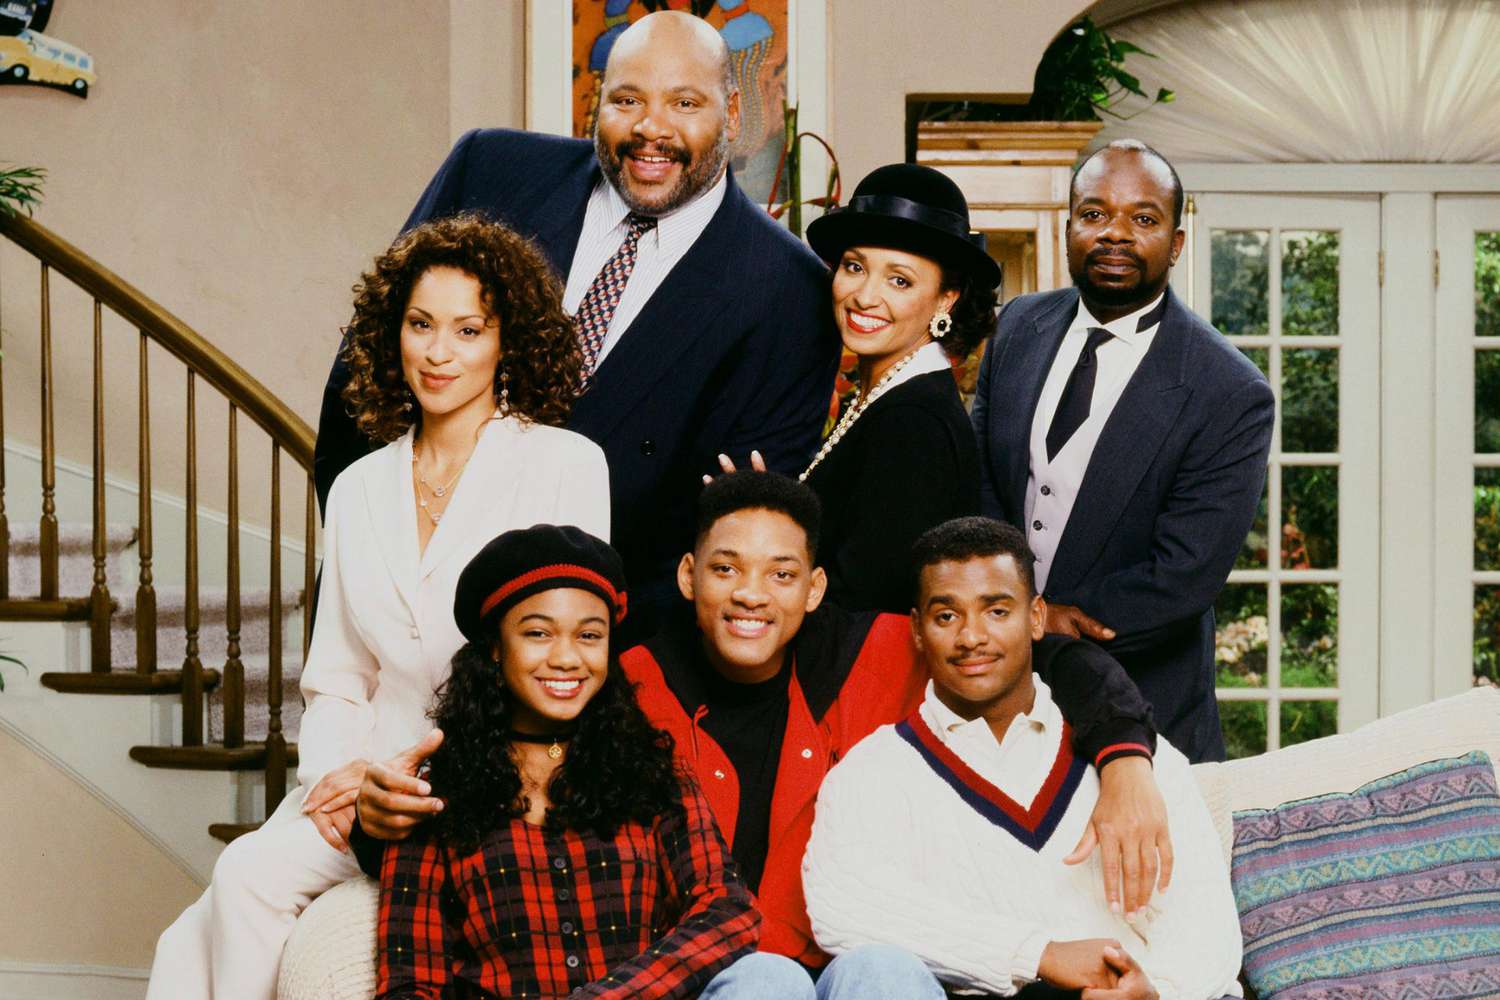 fresh prince of bel air on hbo max